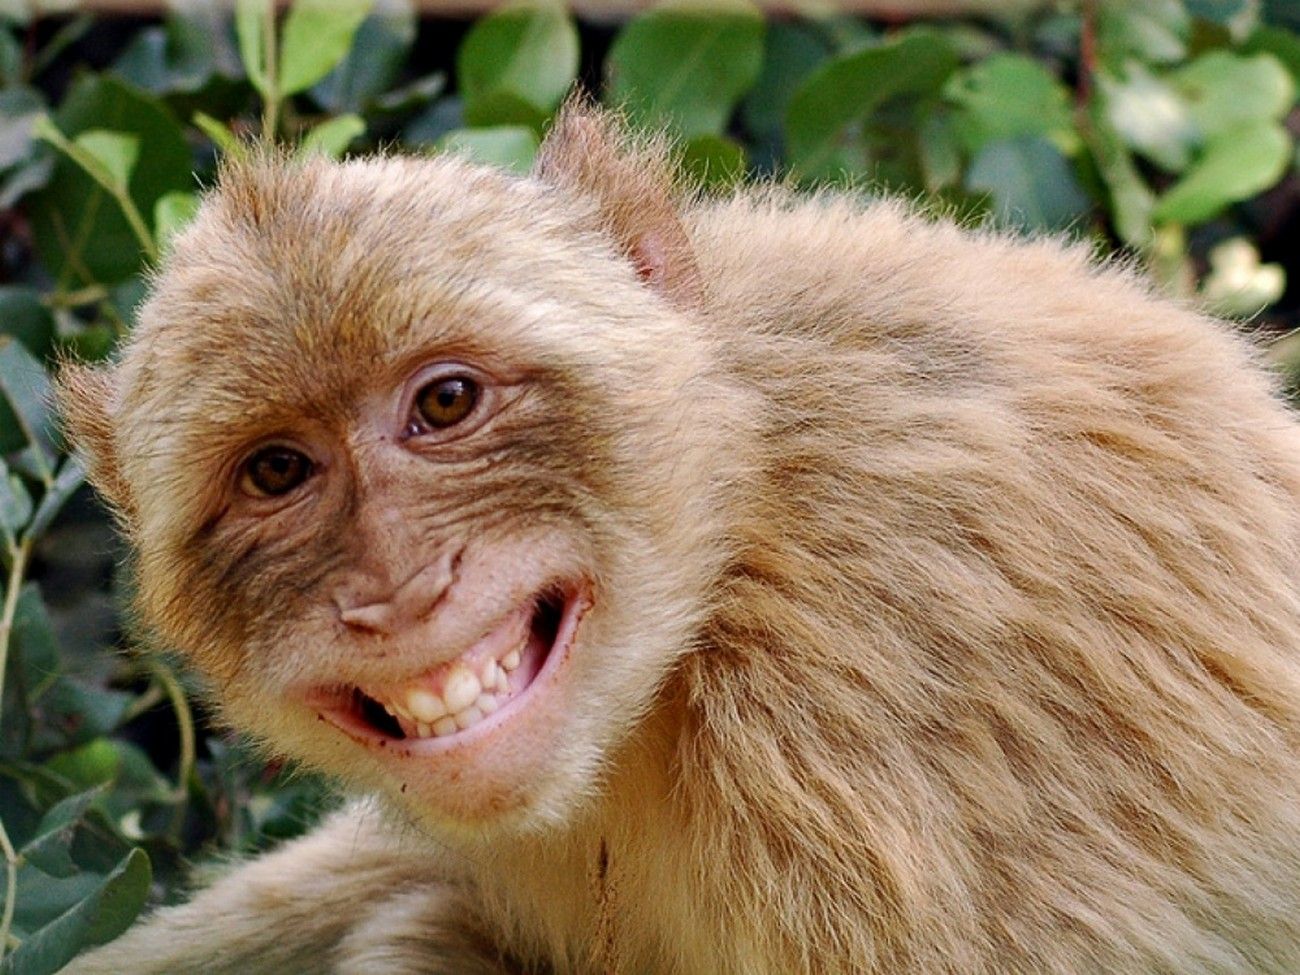 animals with a contagious smile in HD. Monkeys funny, Laughing animals, Funny monkey memes